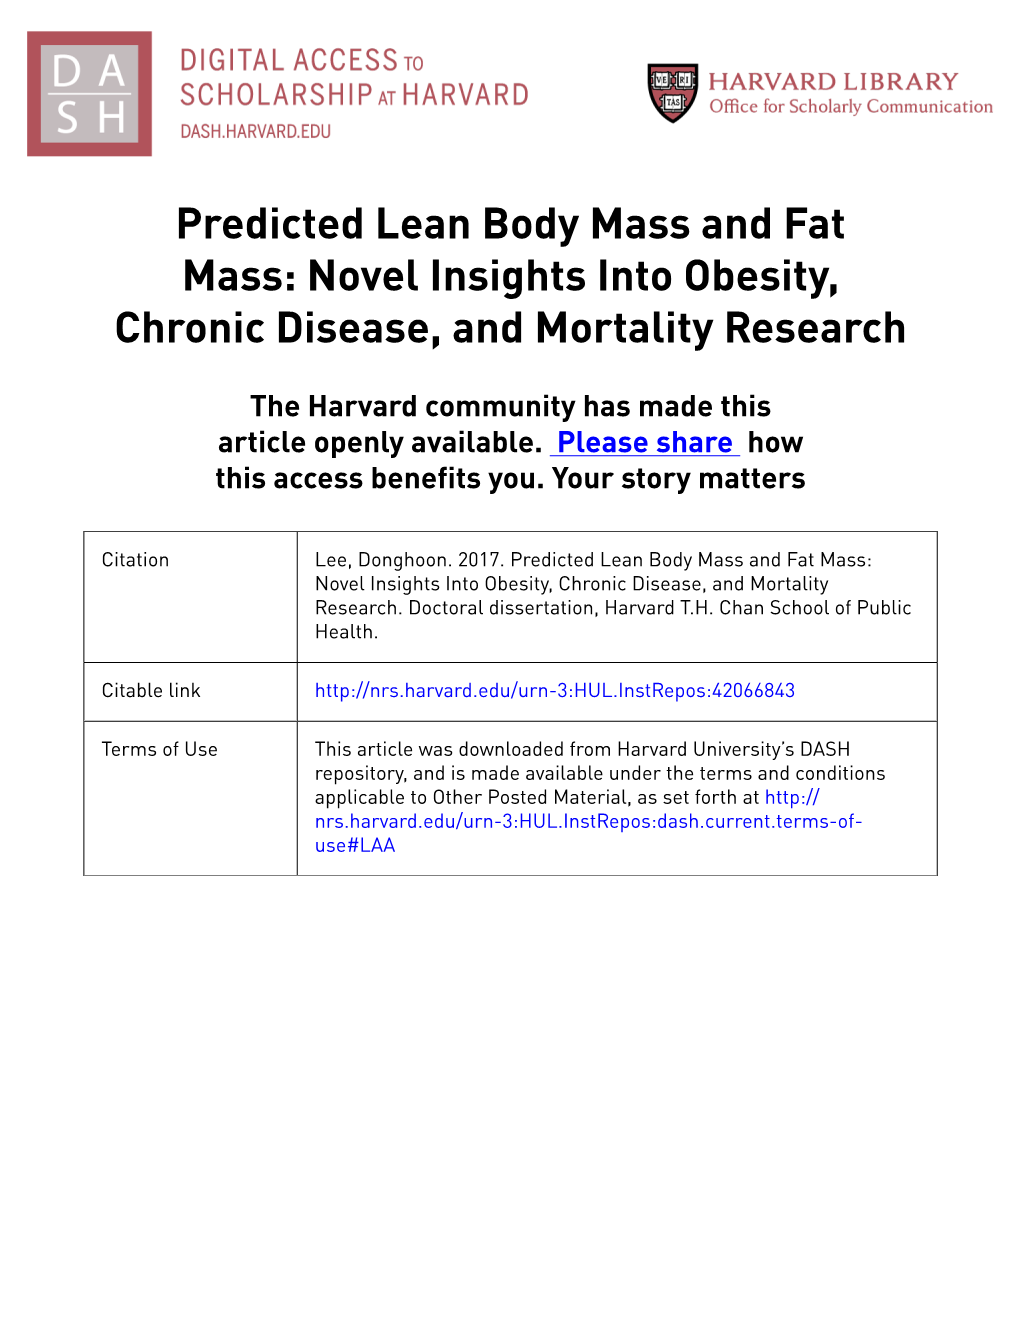 Predicted Lean Body Mass and Fat Mass: Novel Insights Into Obesity, Chronic Disease, and Mortality Research